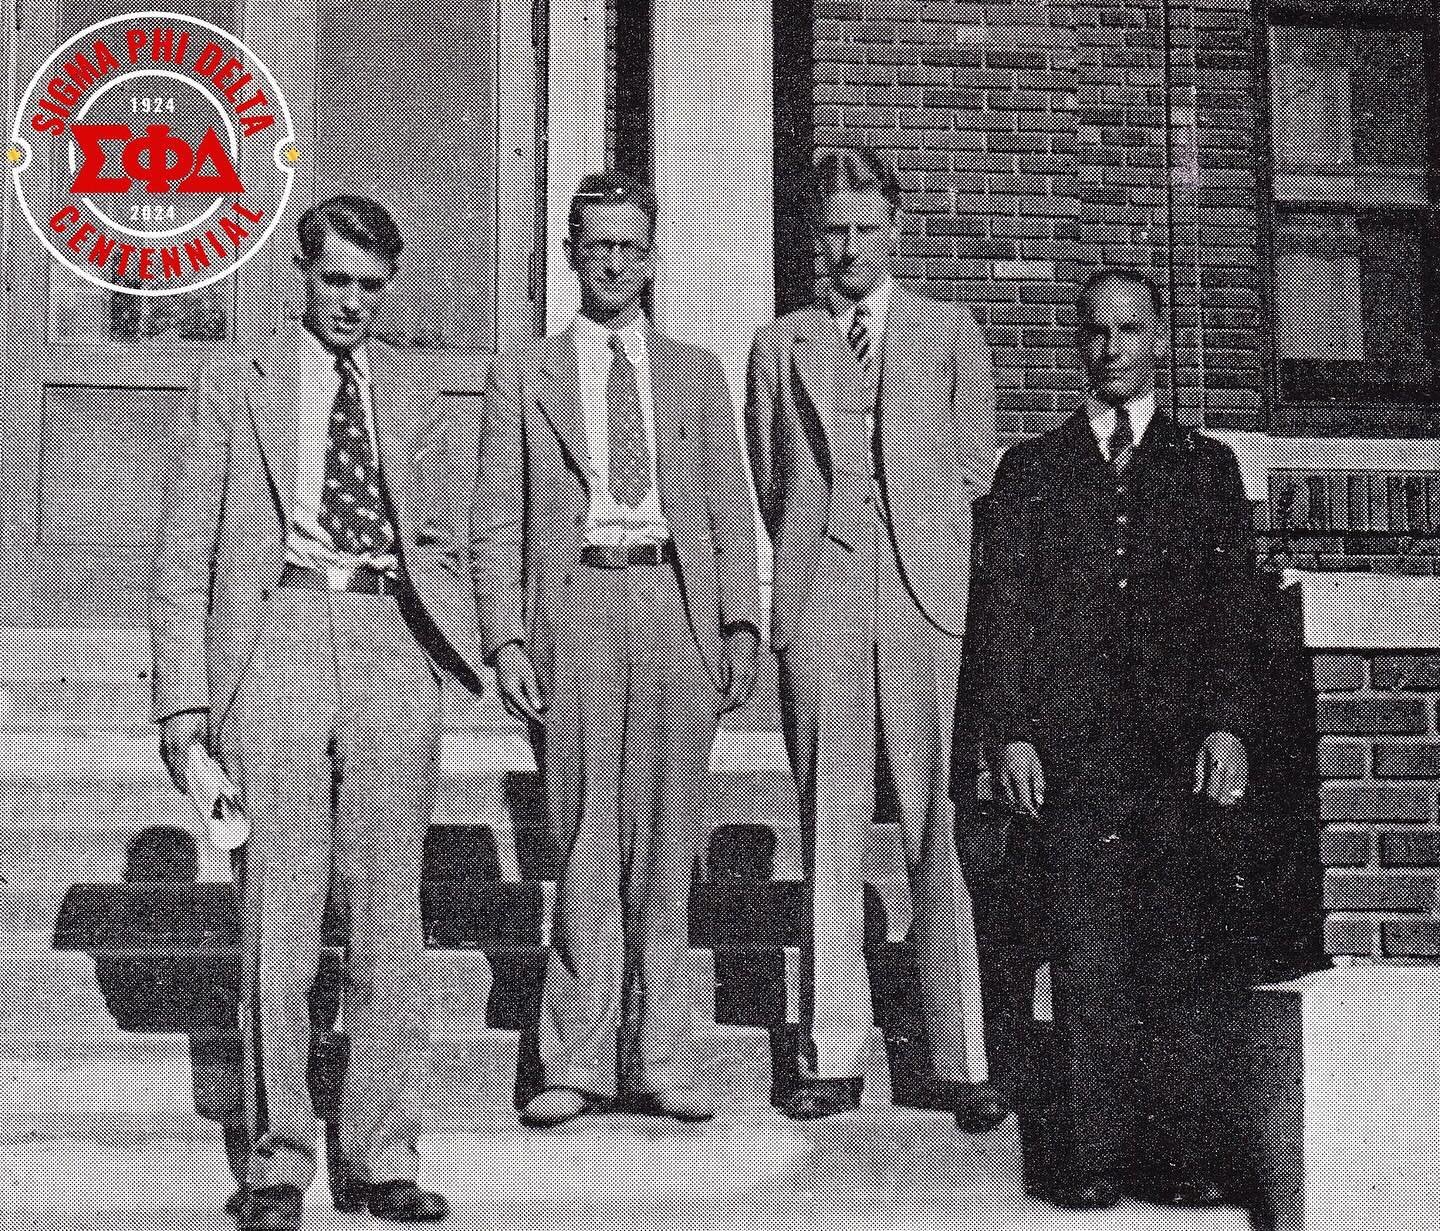 Exactly 1 month from today marks 100 years of Sigma Phi Delta history! From now through our Centennial Celebration in July, we&rsquo;ll be highlighting various Brothers throughout the ages. Please share with us your own photos and stories by emailing